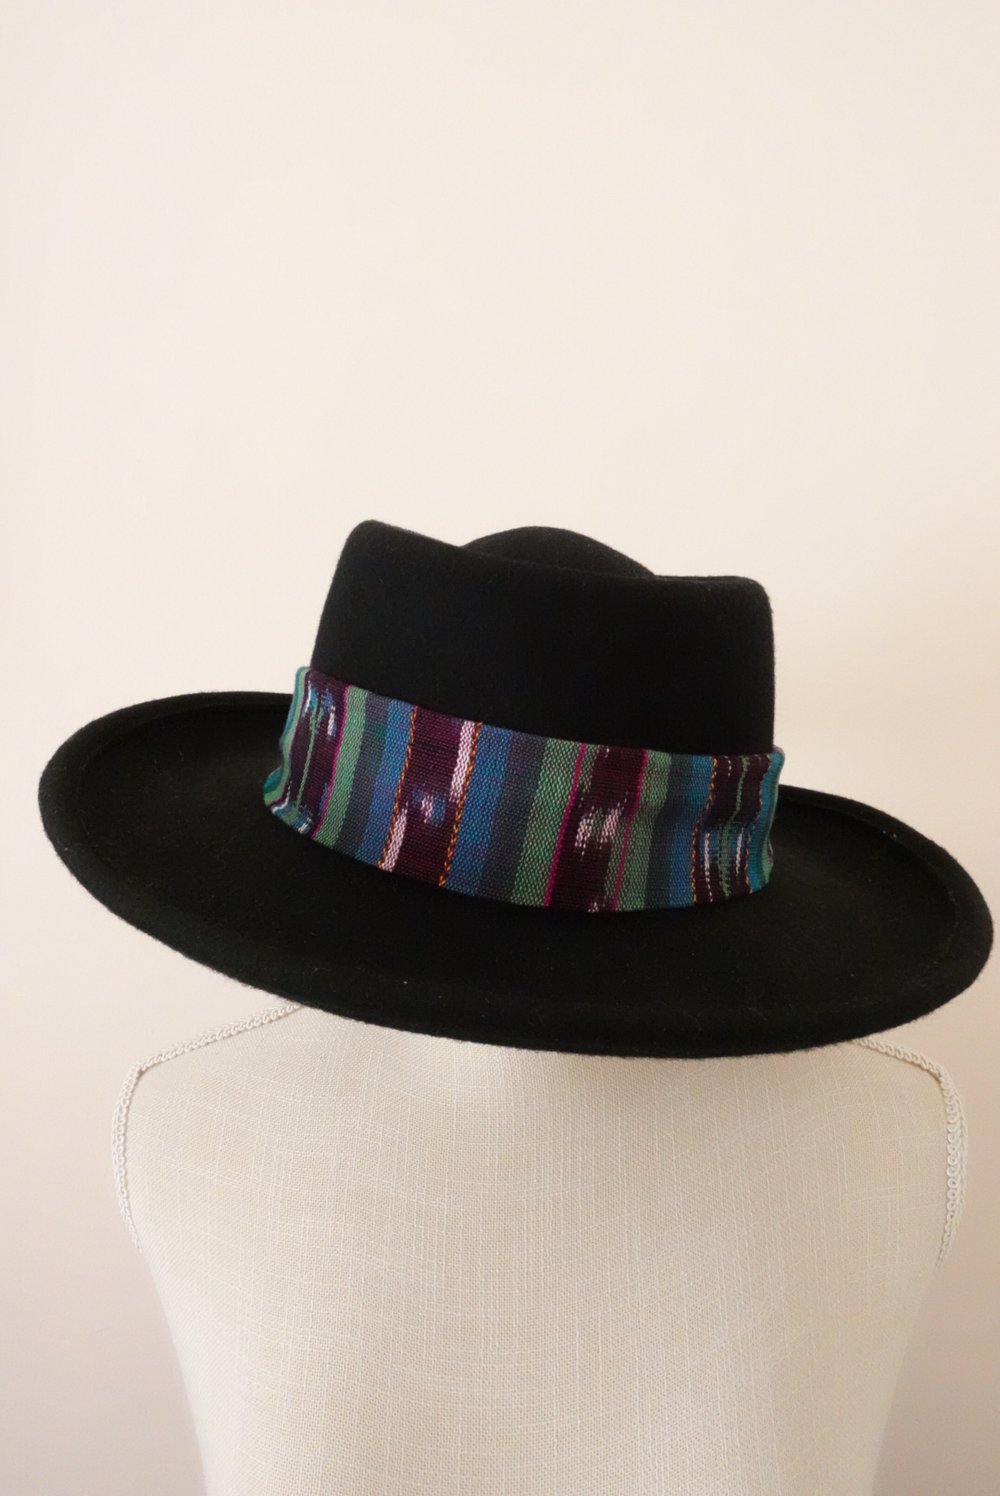  Tipico Wool Boater Hat